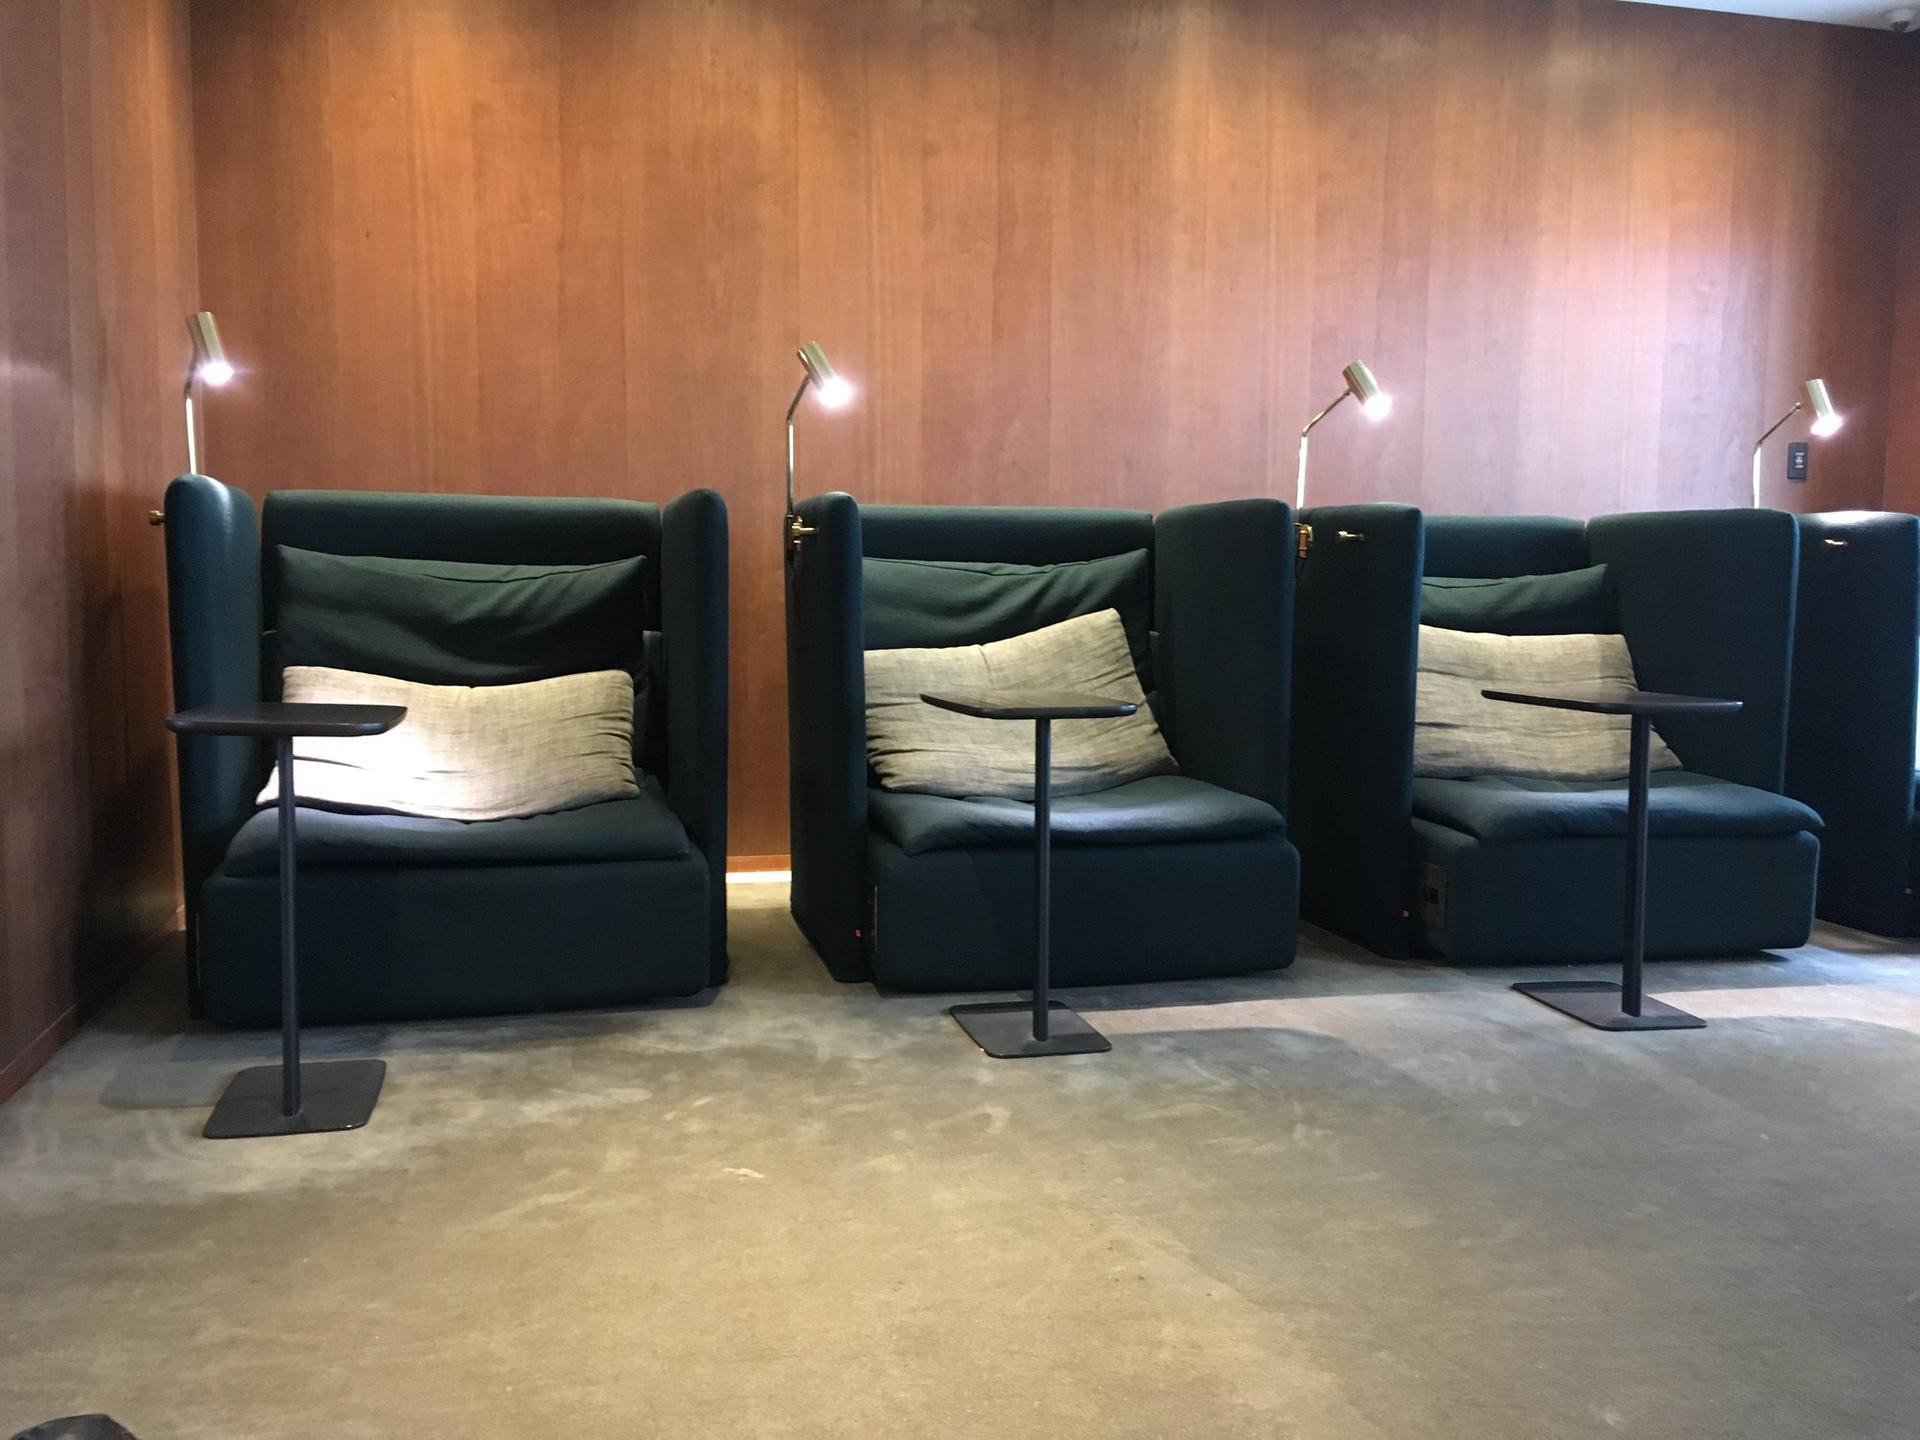 Cathay Pacific Lounge image 23 of 37